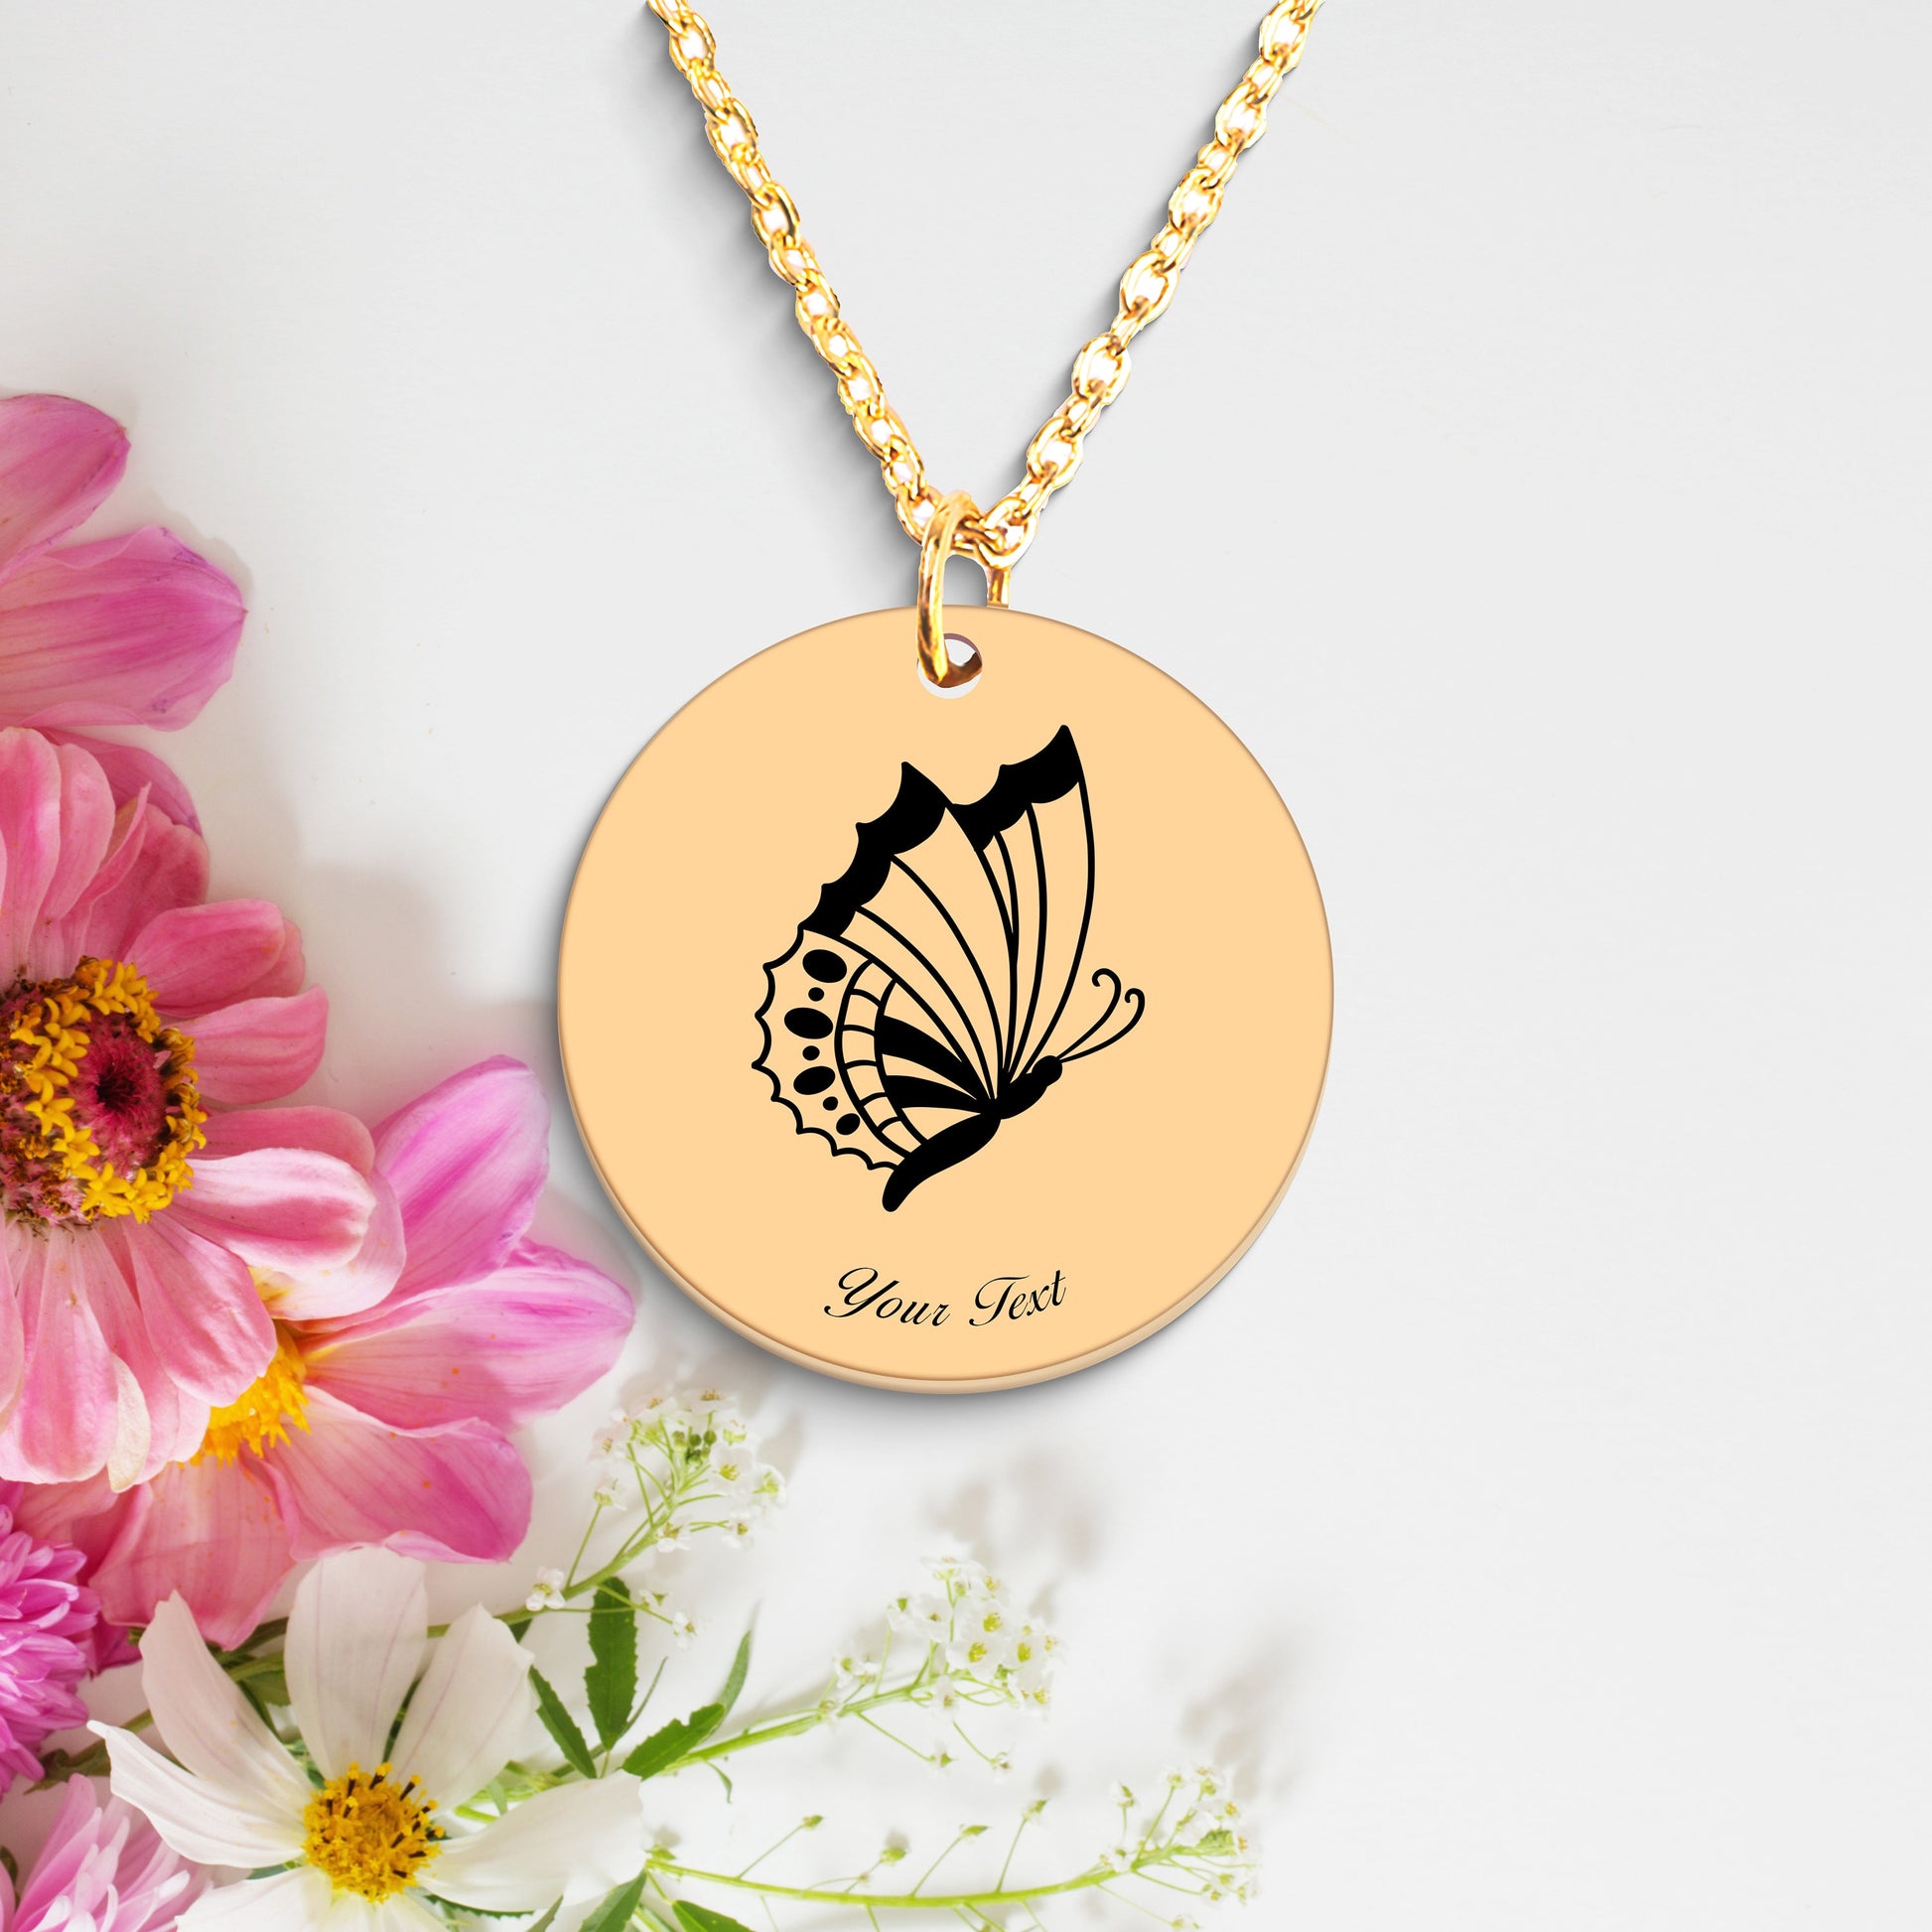 Butterfly Necklace- Personalize it